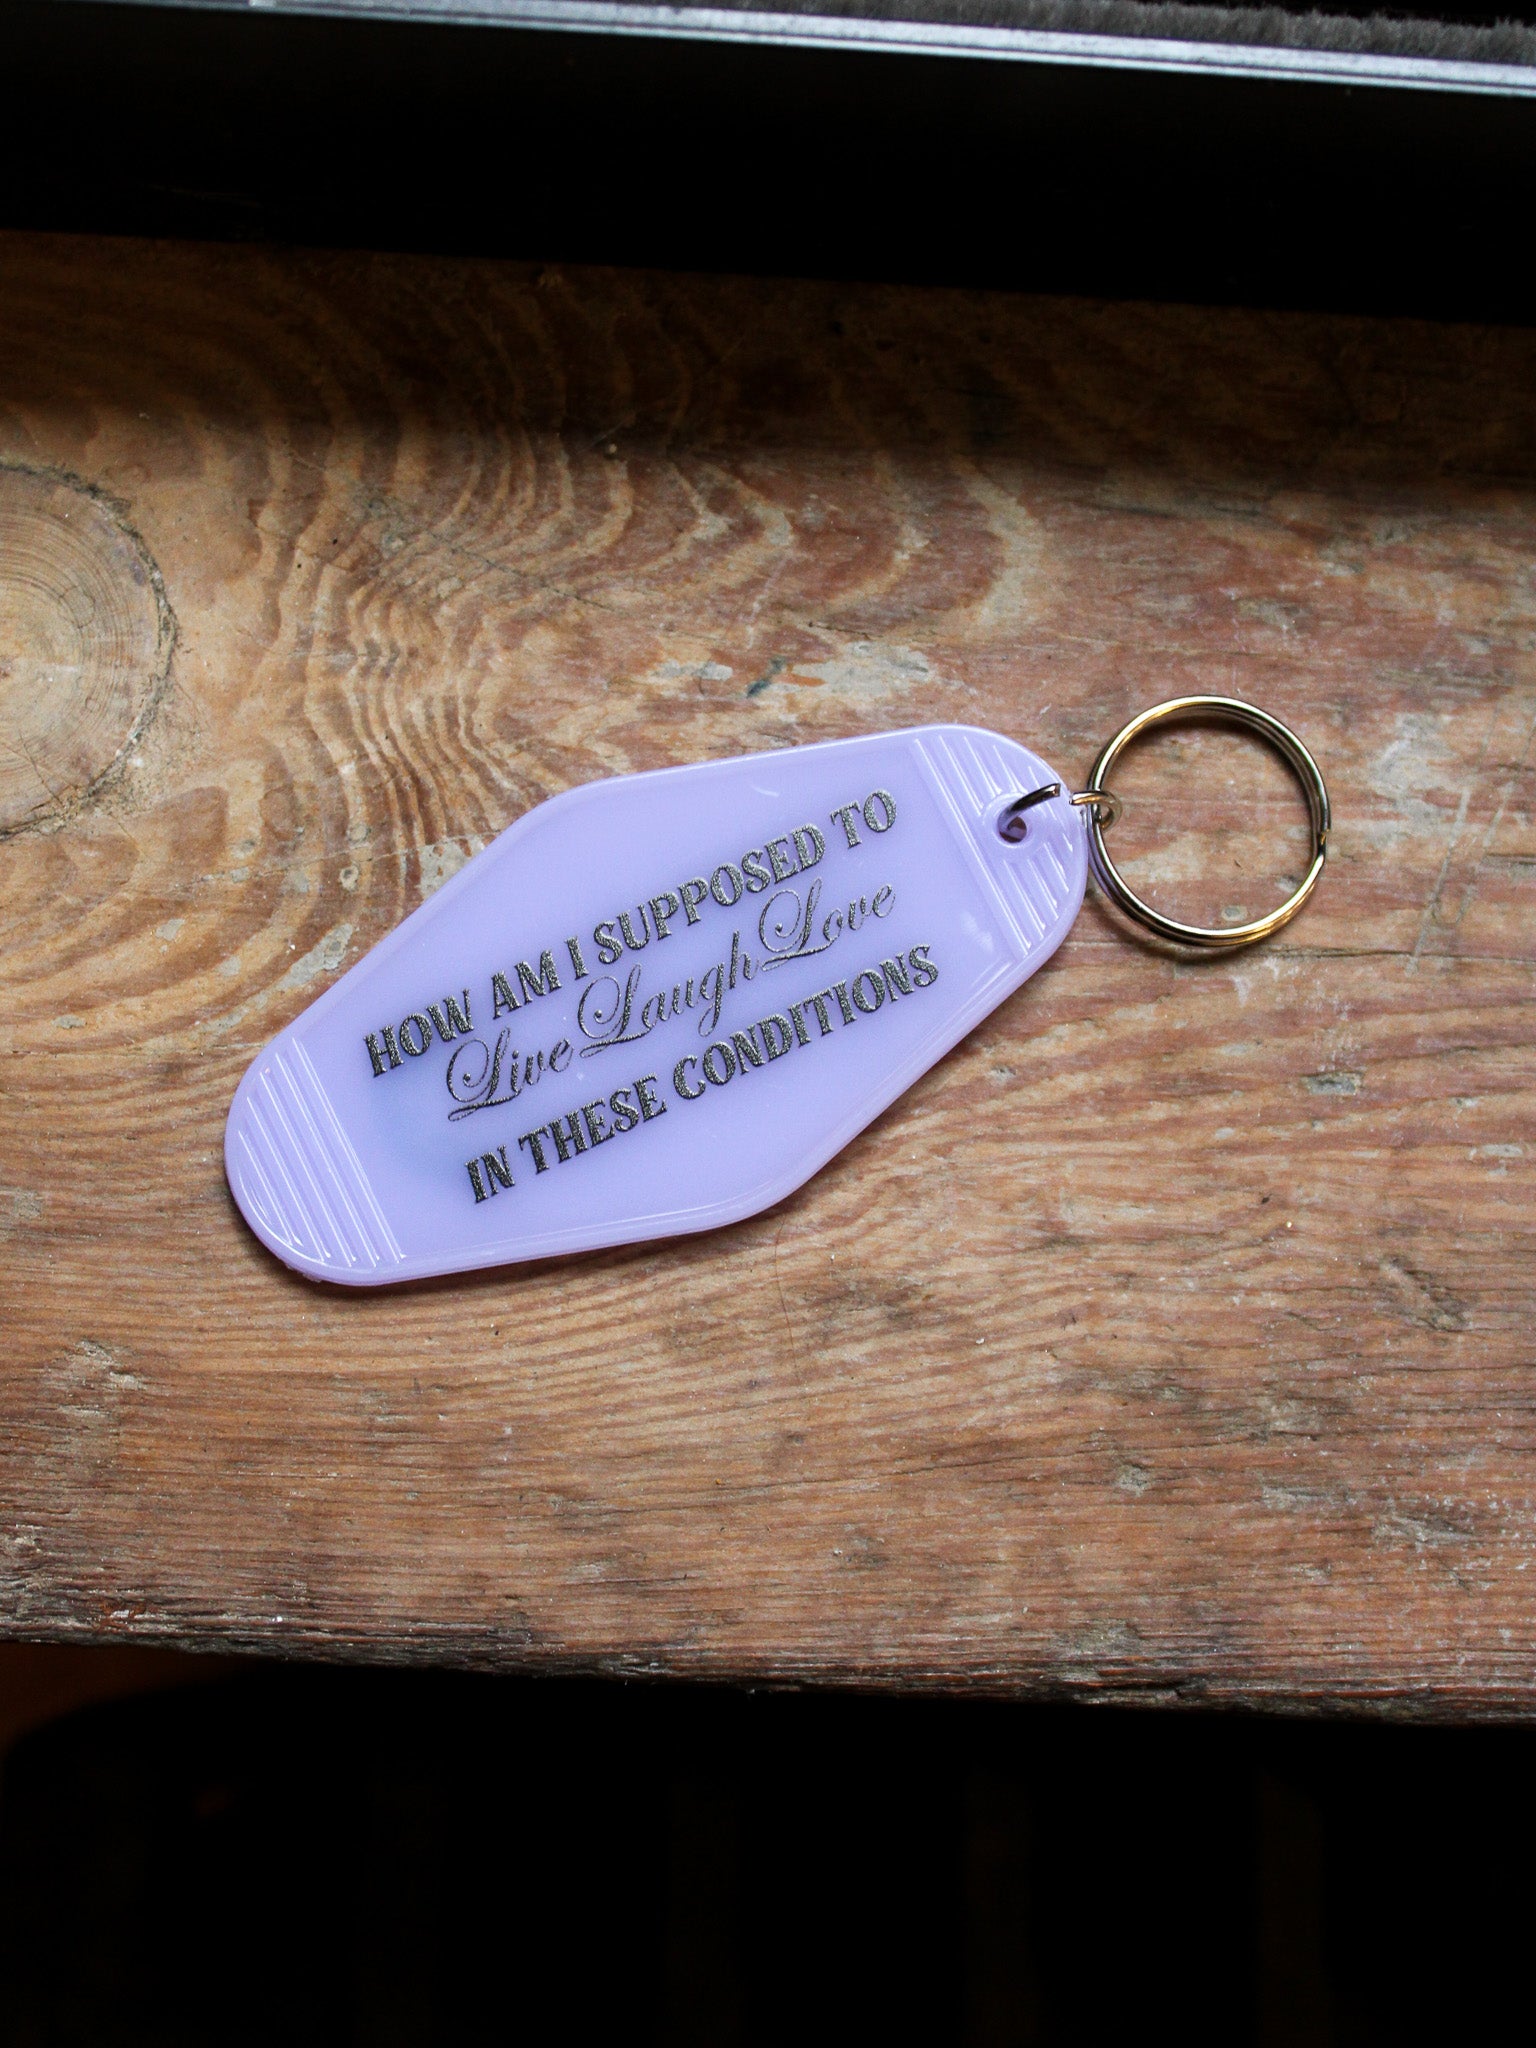 These Conditions Lavender Keychain